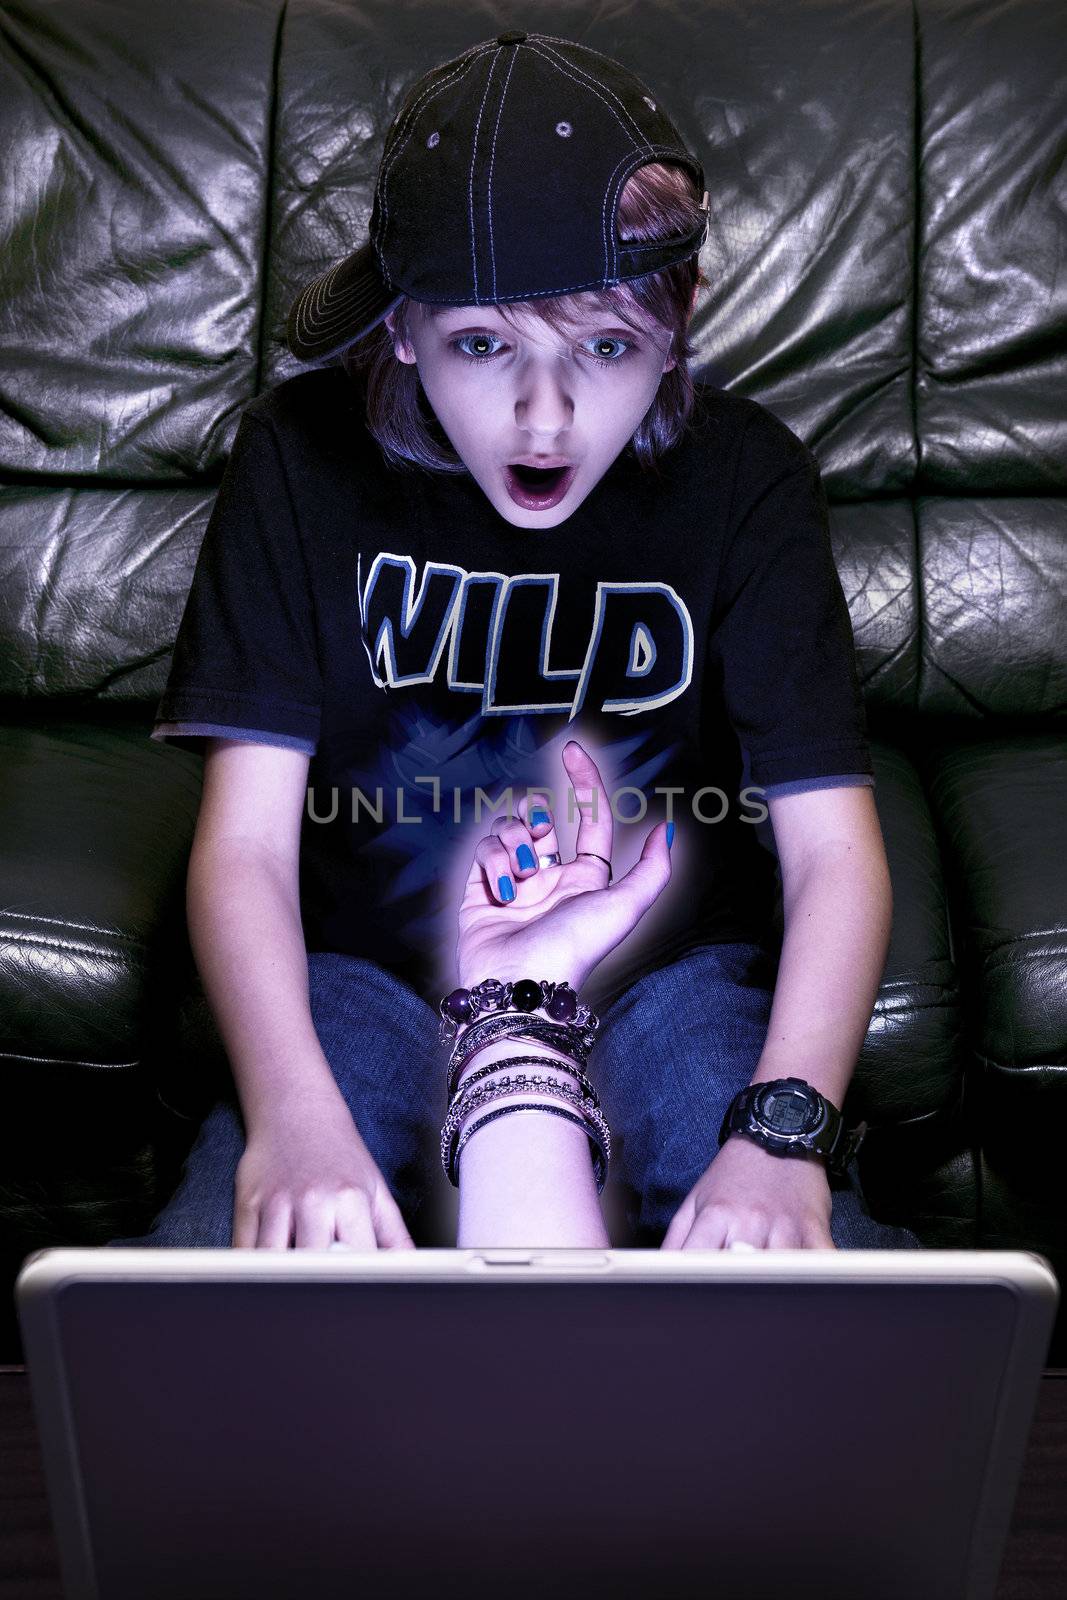 Boy shocked and tempt by the web-site content